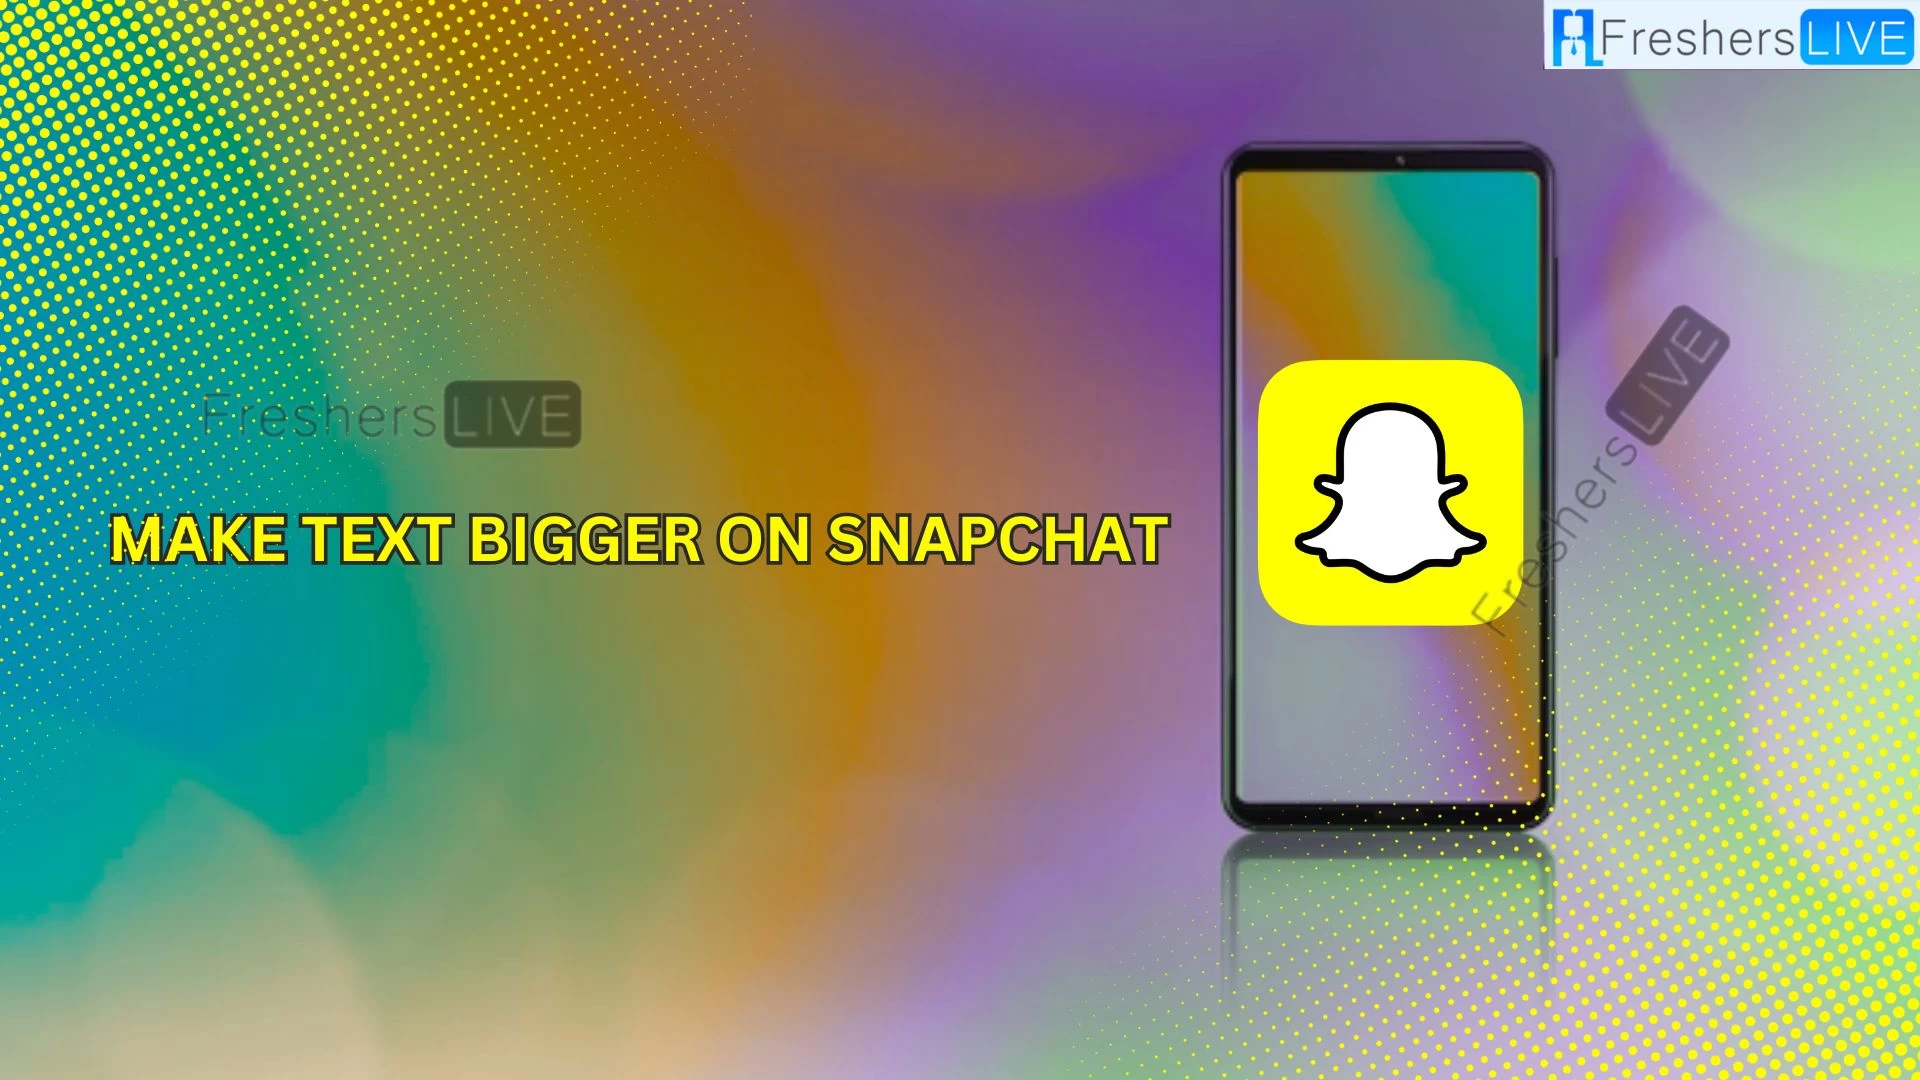 How to Type Big on Snapchat? Snapchat Overview and Features